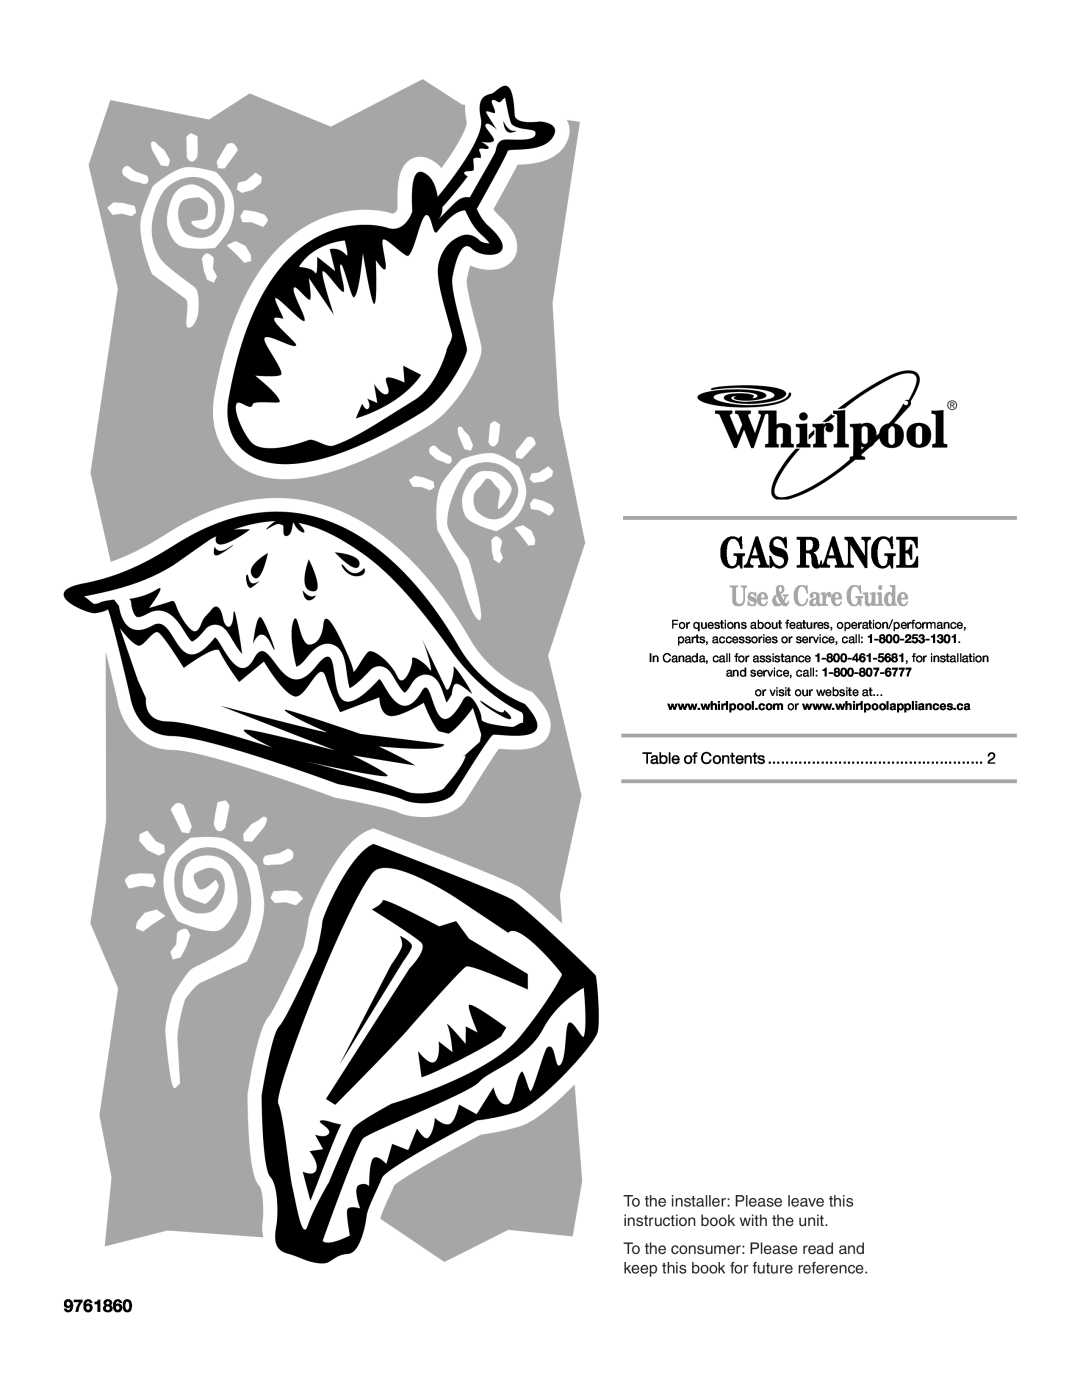 Whirlpool SF196LEPB1 manual Gas Range, Use &Care Guide, 9761860, and service, call or visit our website at 